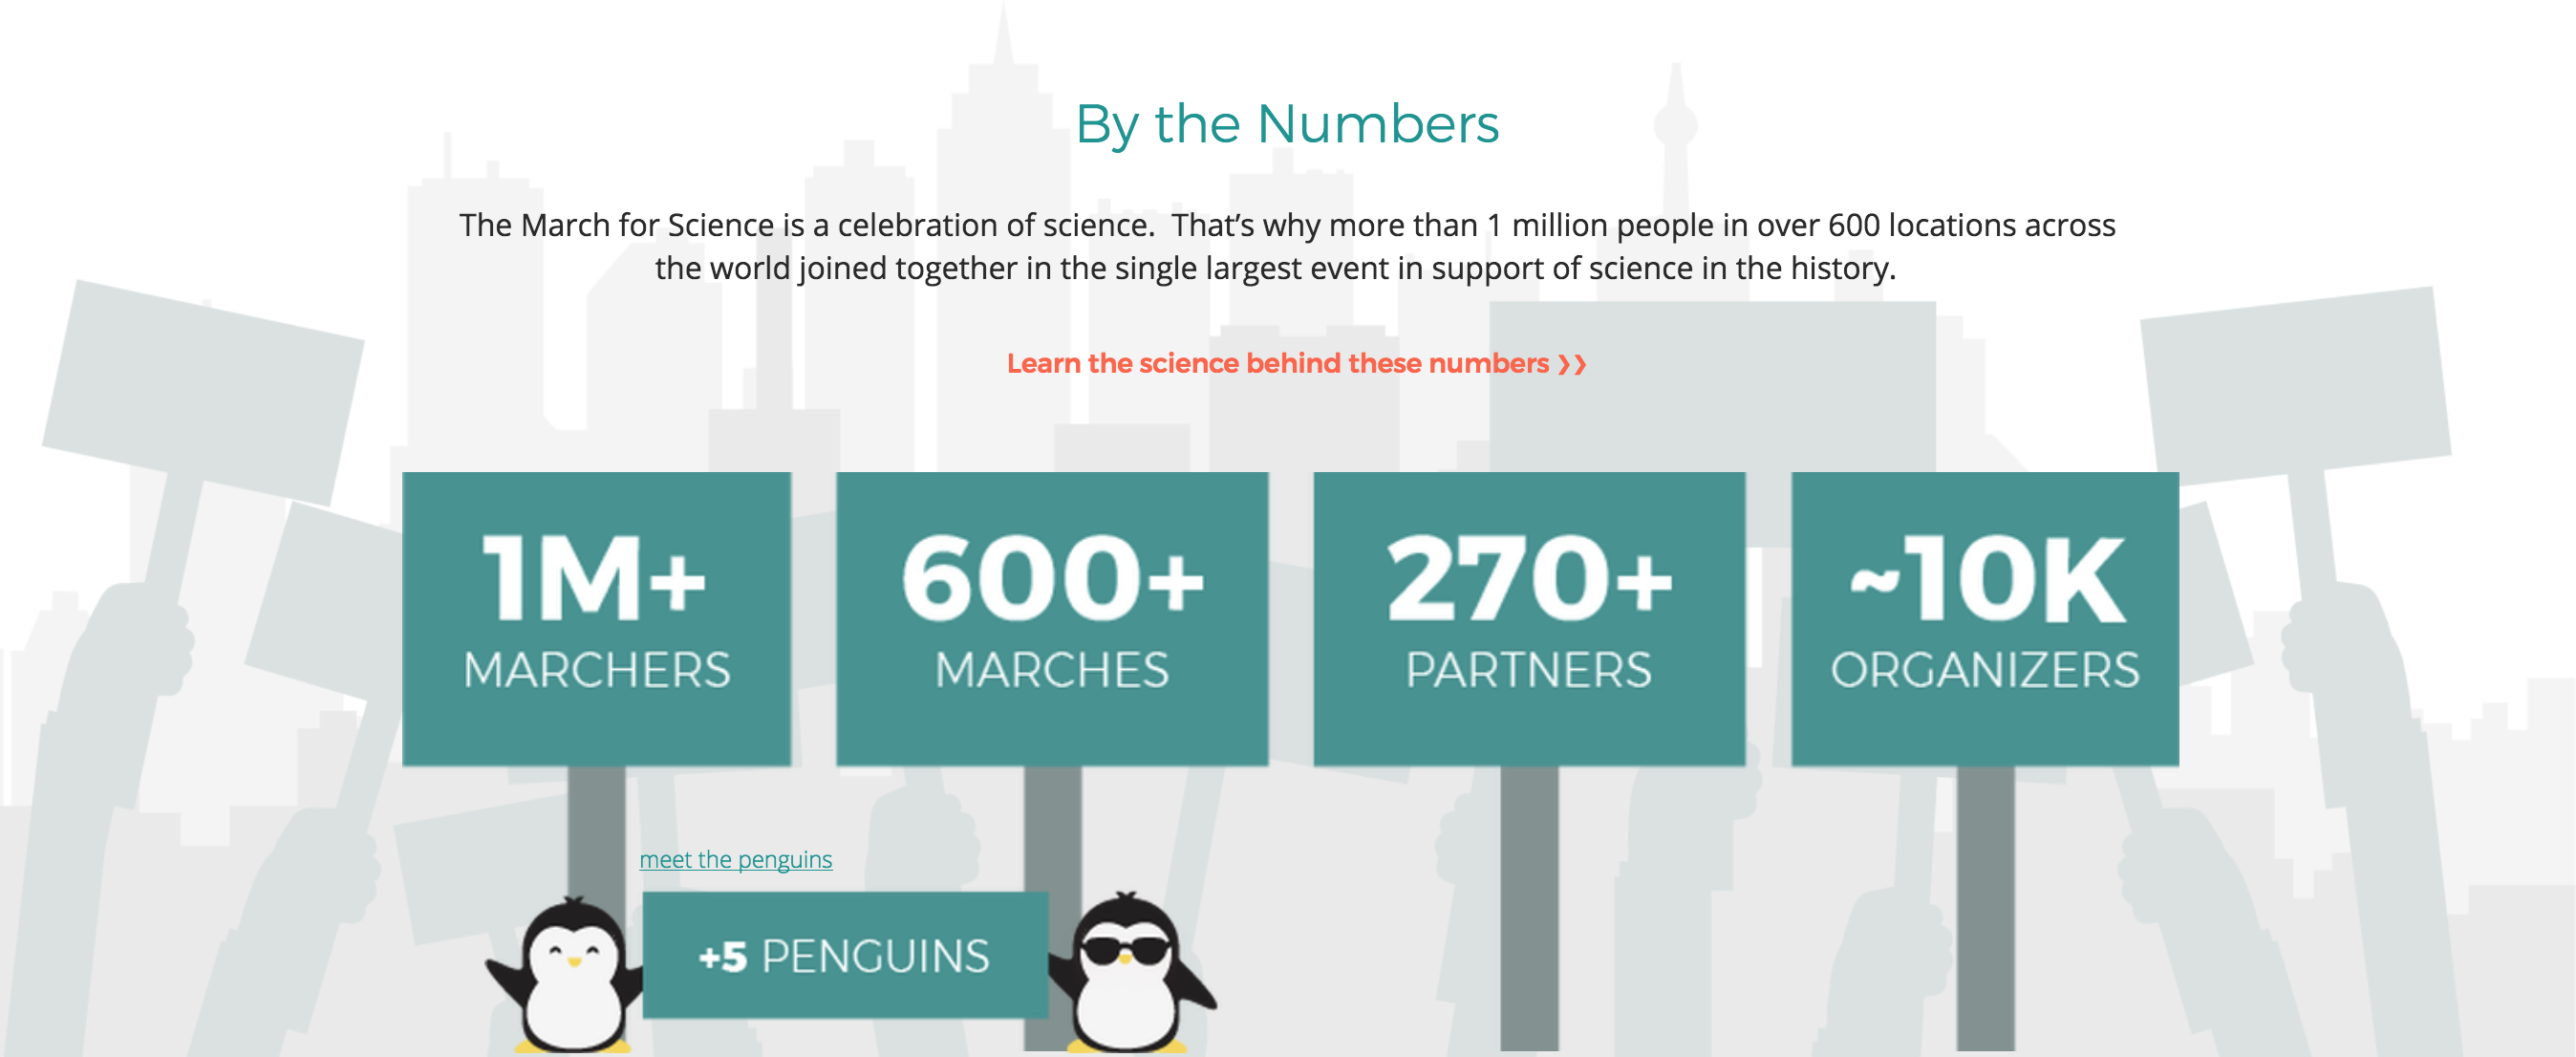 Copy of infographic from March for Science website in 2017.